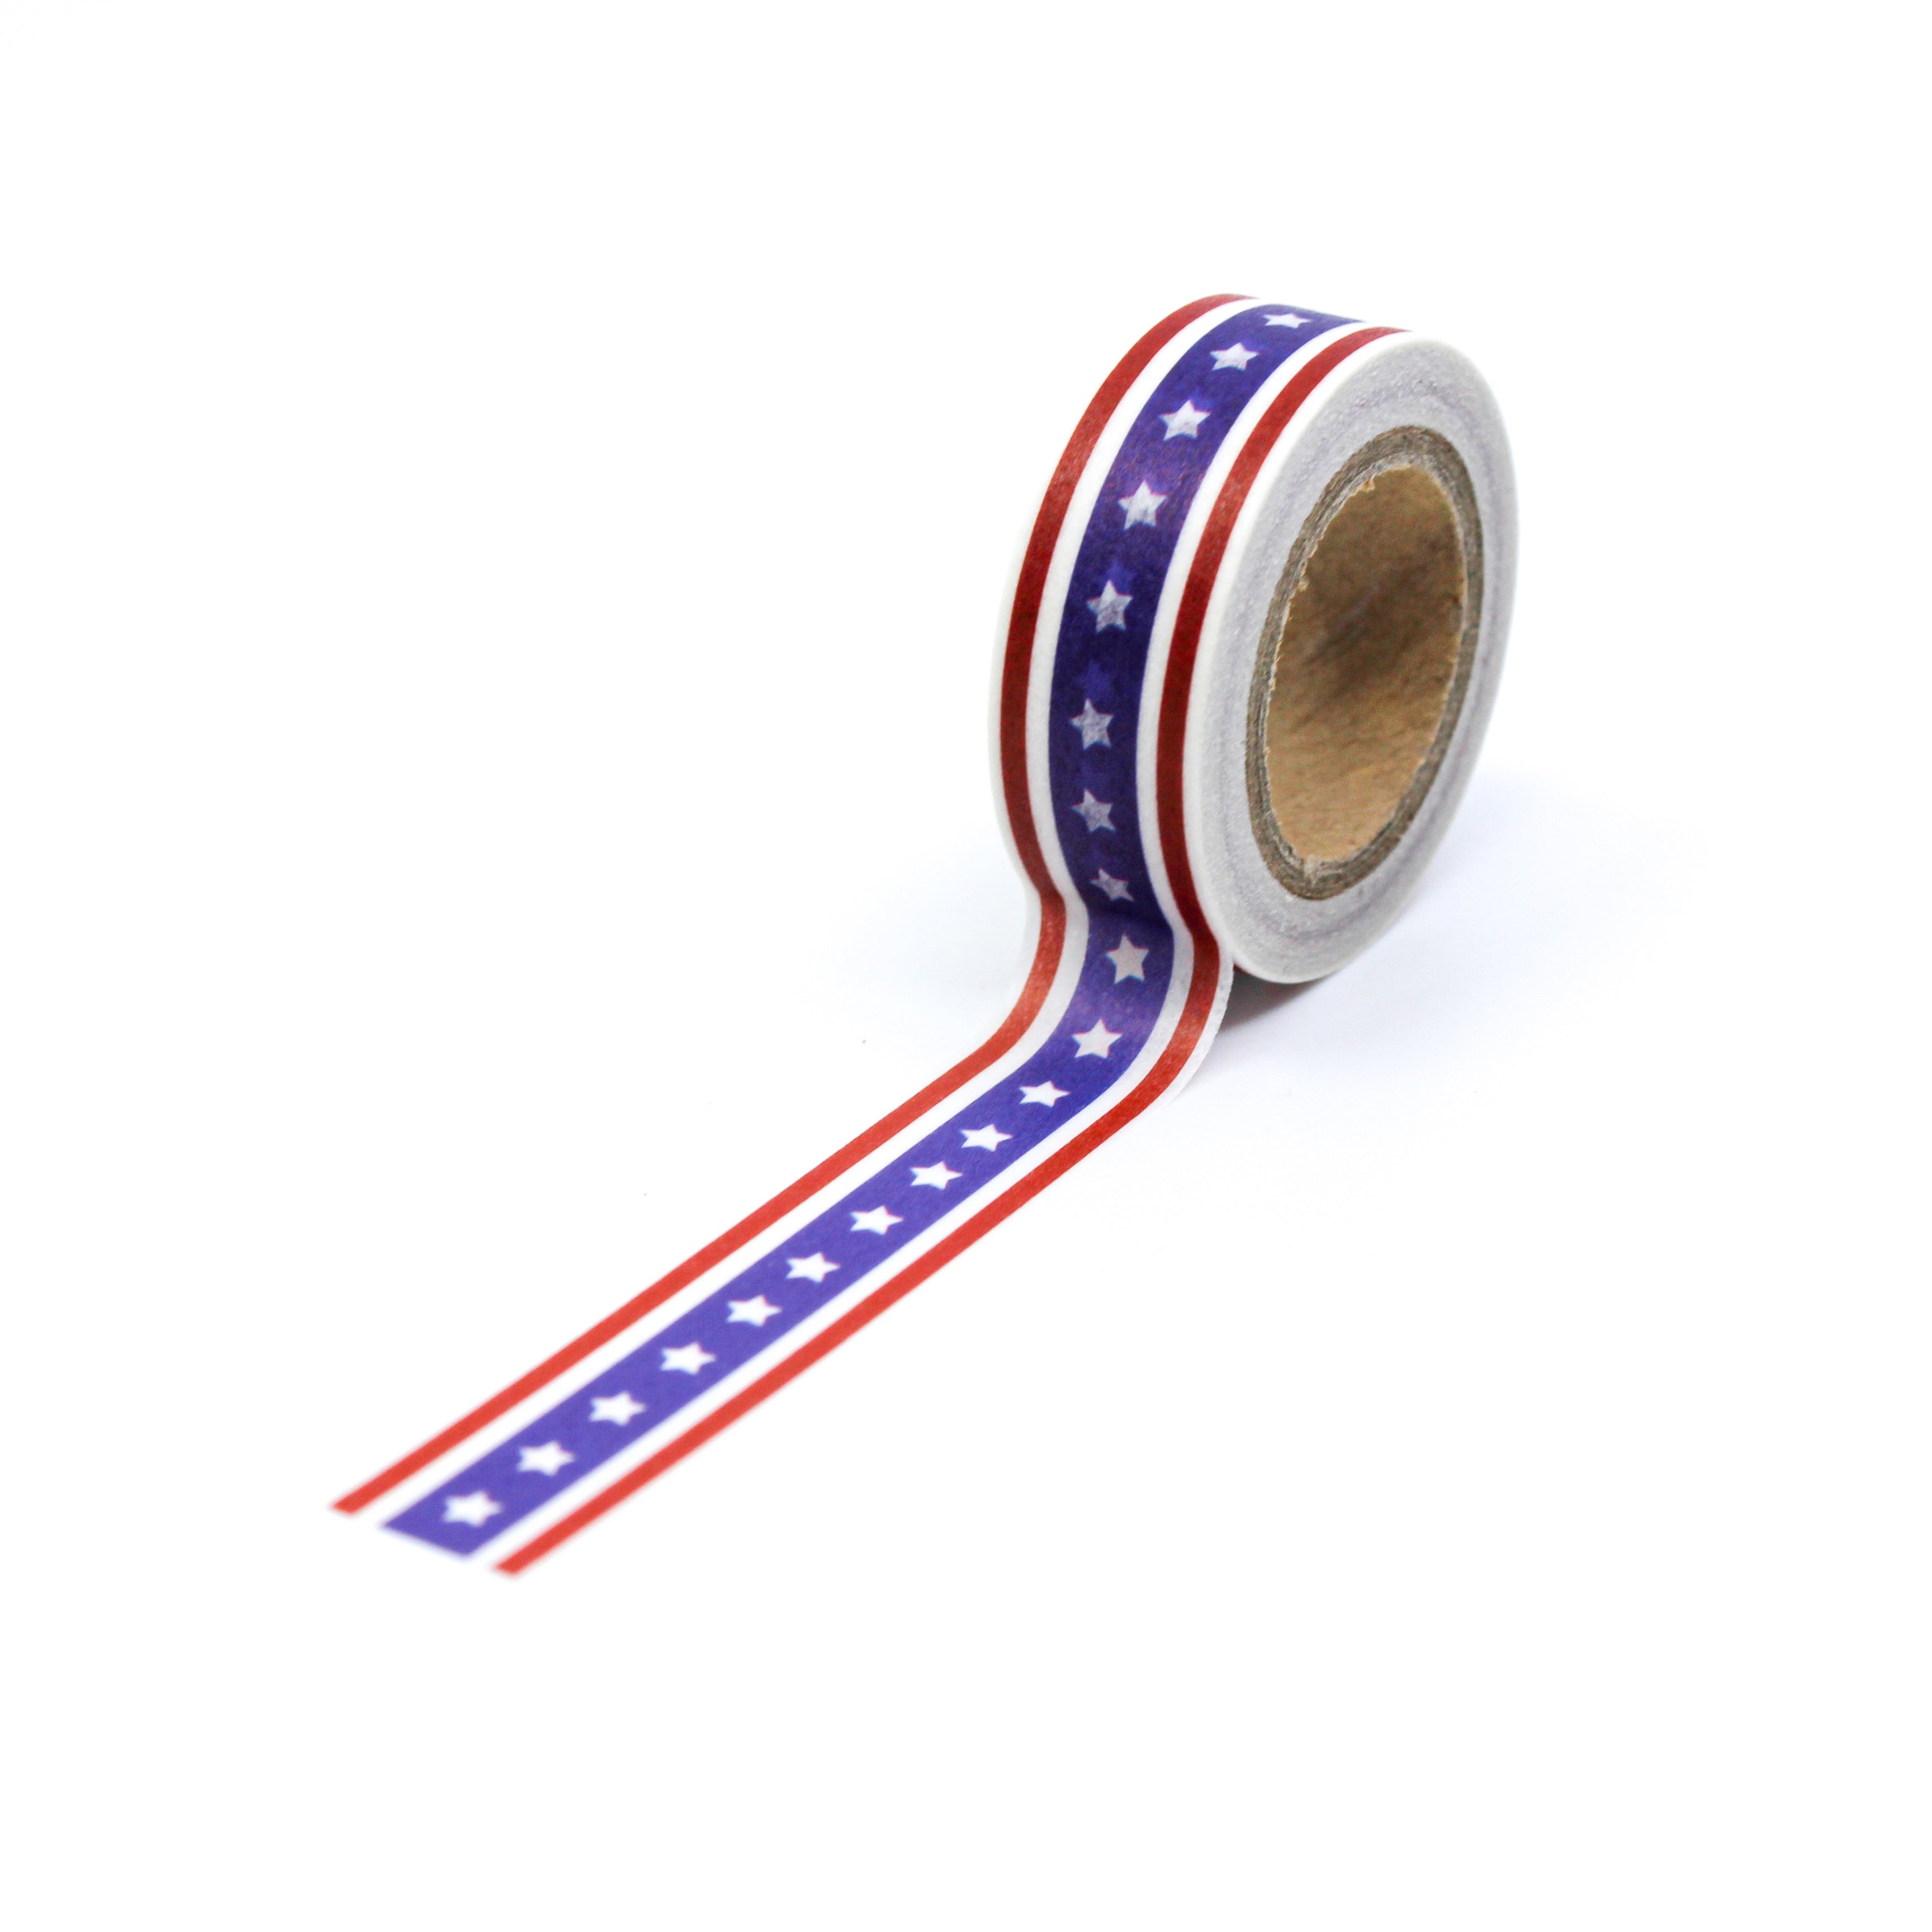 This is a full pattern repeat view of an American star red, blue and white stripe pattern Washi Tape from BBB Supplies Craft Shop